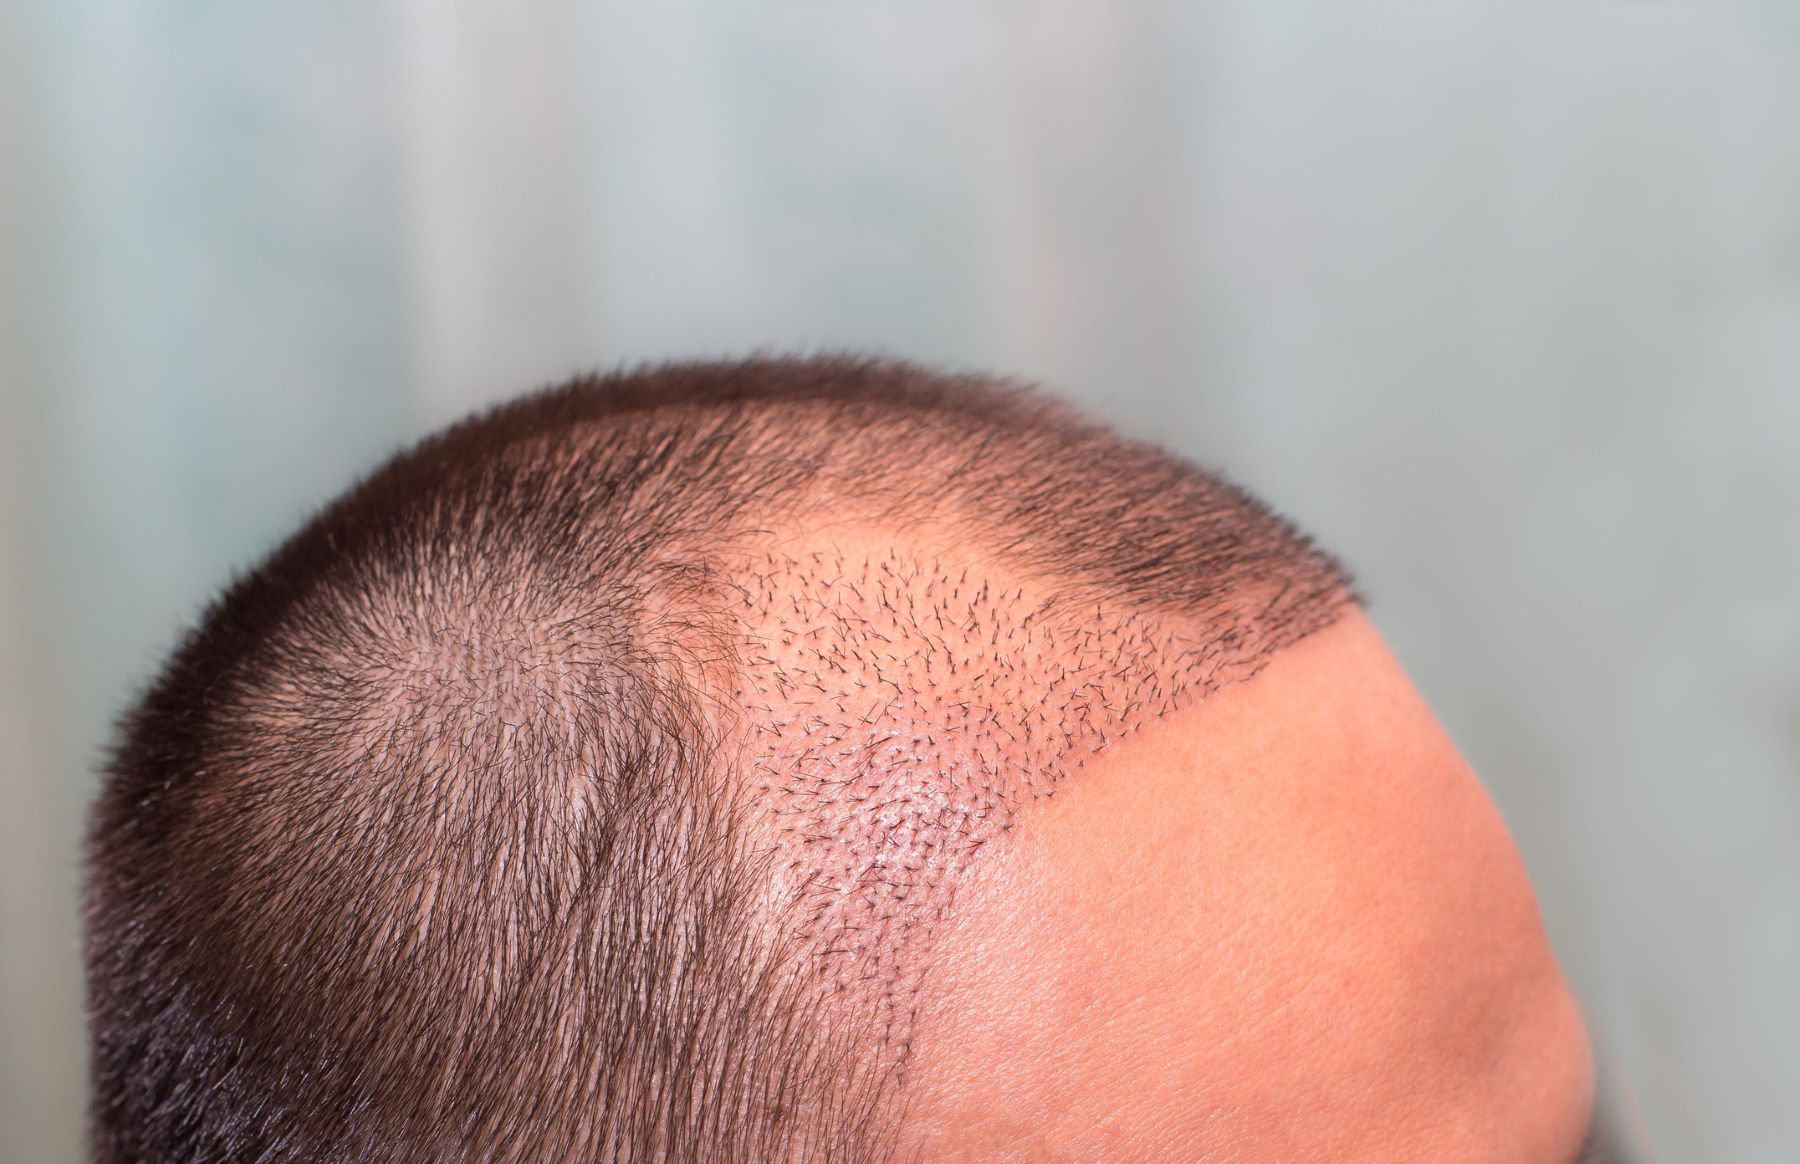 New hair growing after hairline transplant surgery